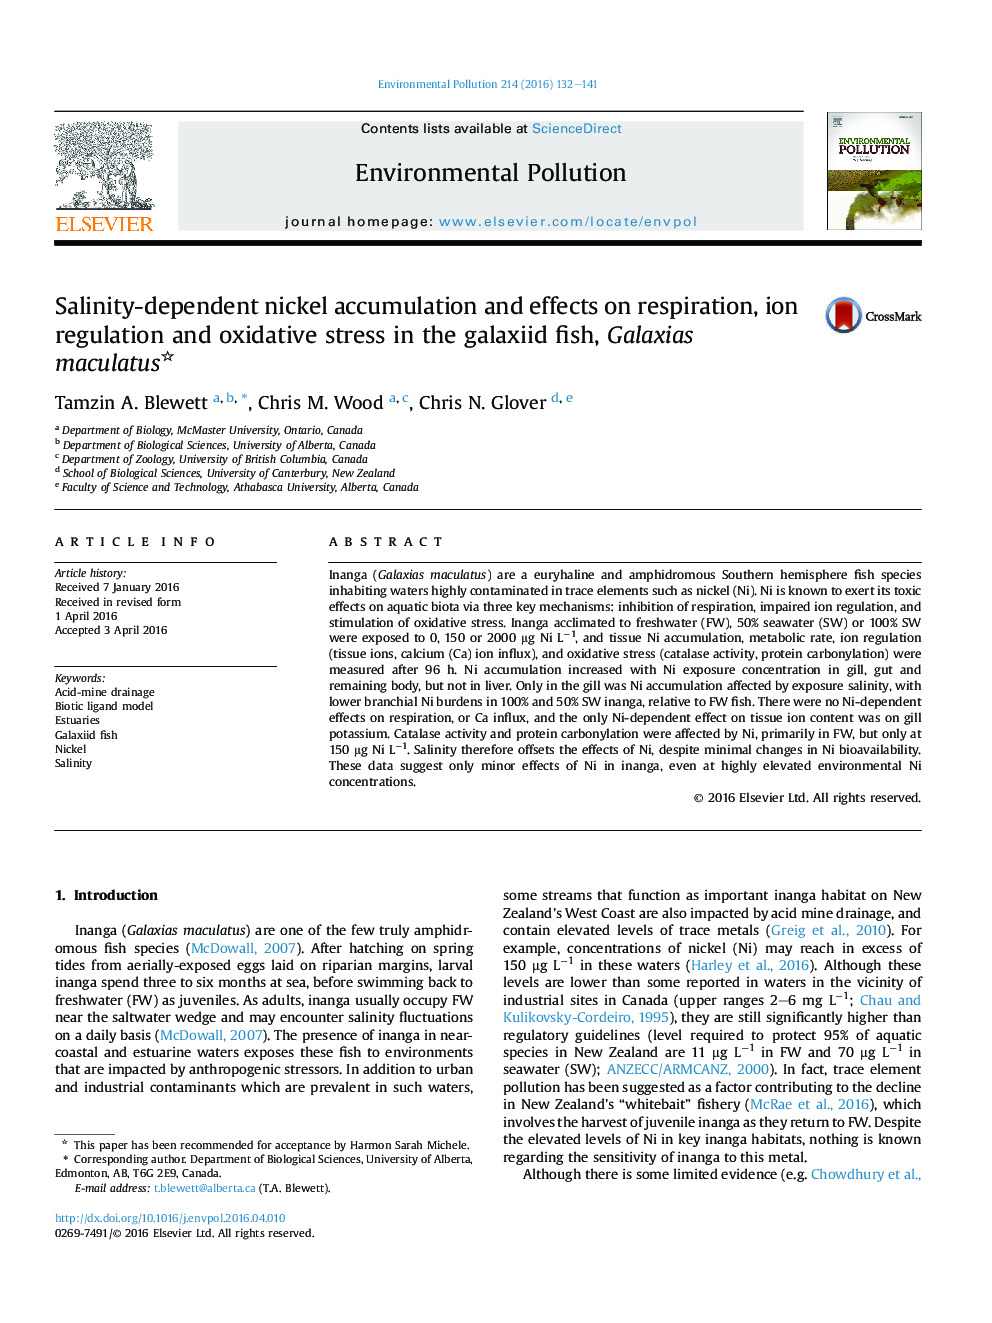 Salinity-dependent nickel accumulation and effects on respiration, ion regulation and oxidative stress in the galaxiid fish, Galaxias maculatus